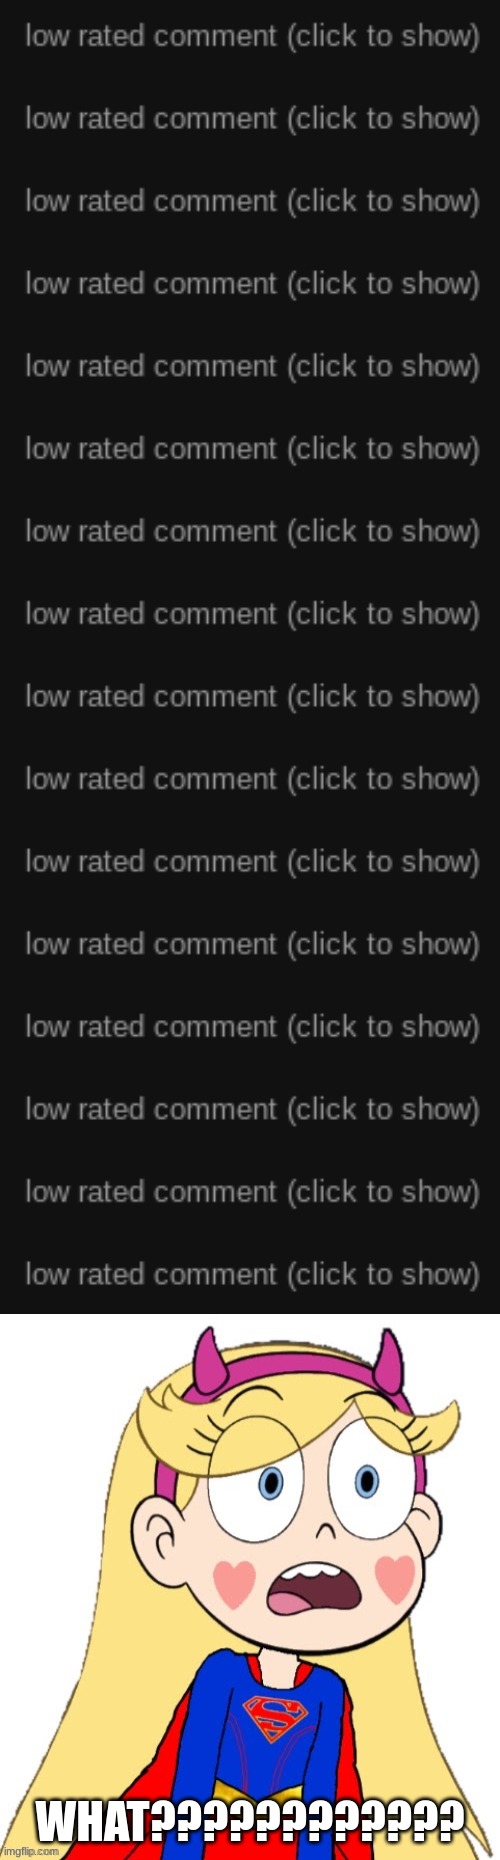 There's so much F****ng Low Rated Comments them. Link: https://imgflip.com/i/79c7vx | WHAT???????????? | image tagged in low rated comment,imgflip,star vs the forces of evil,memes | made w/ Imgflip meme maker